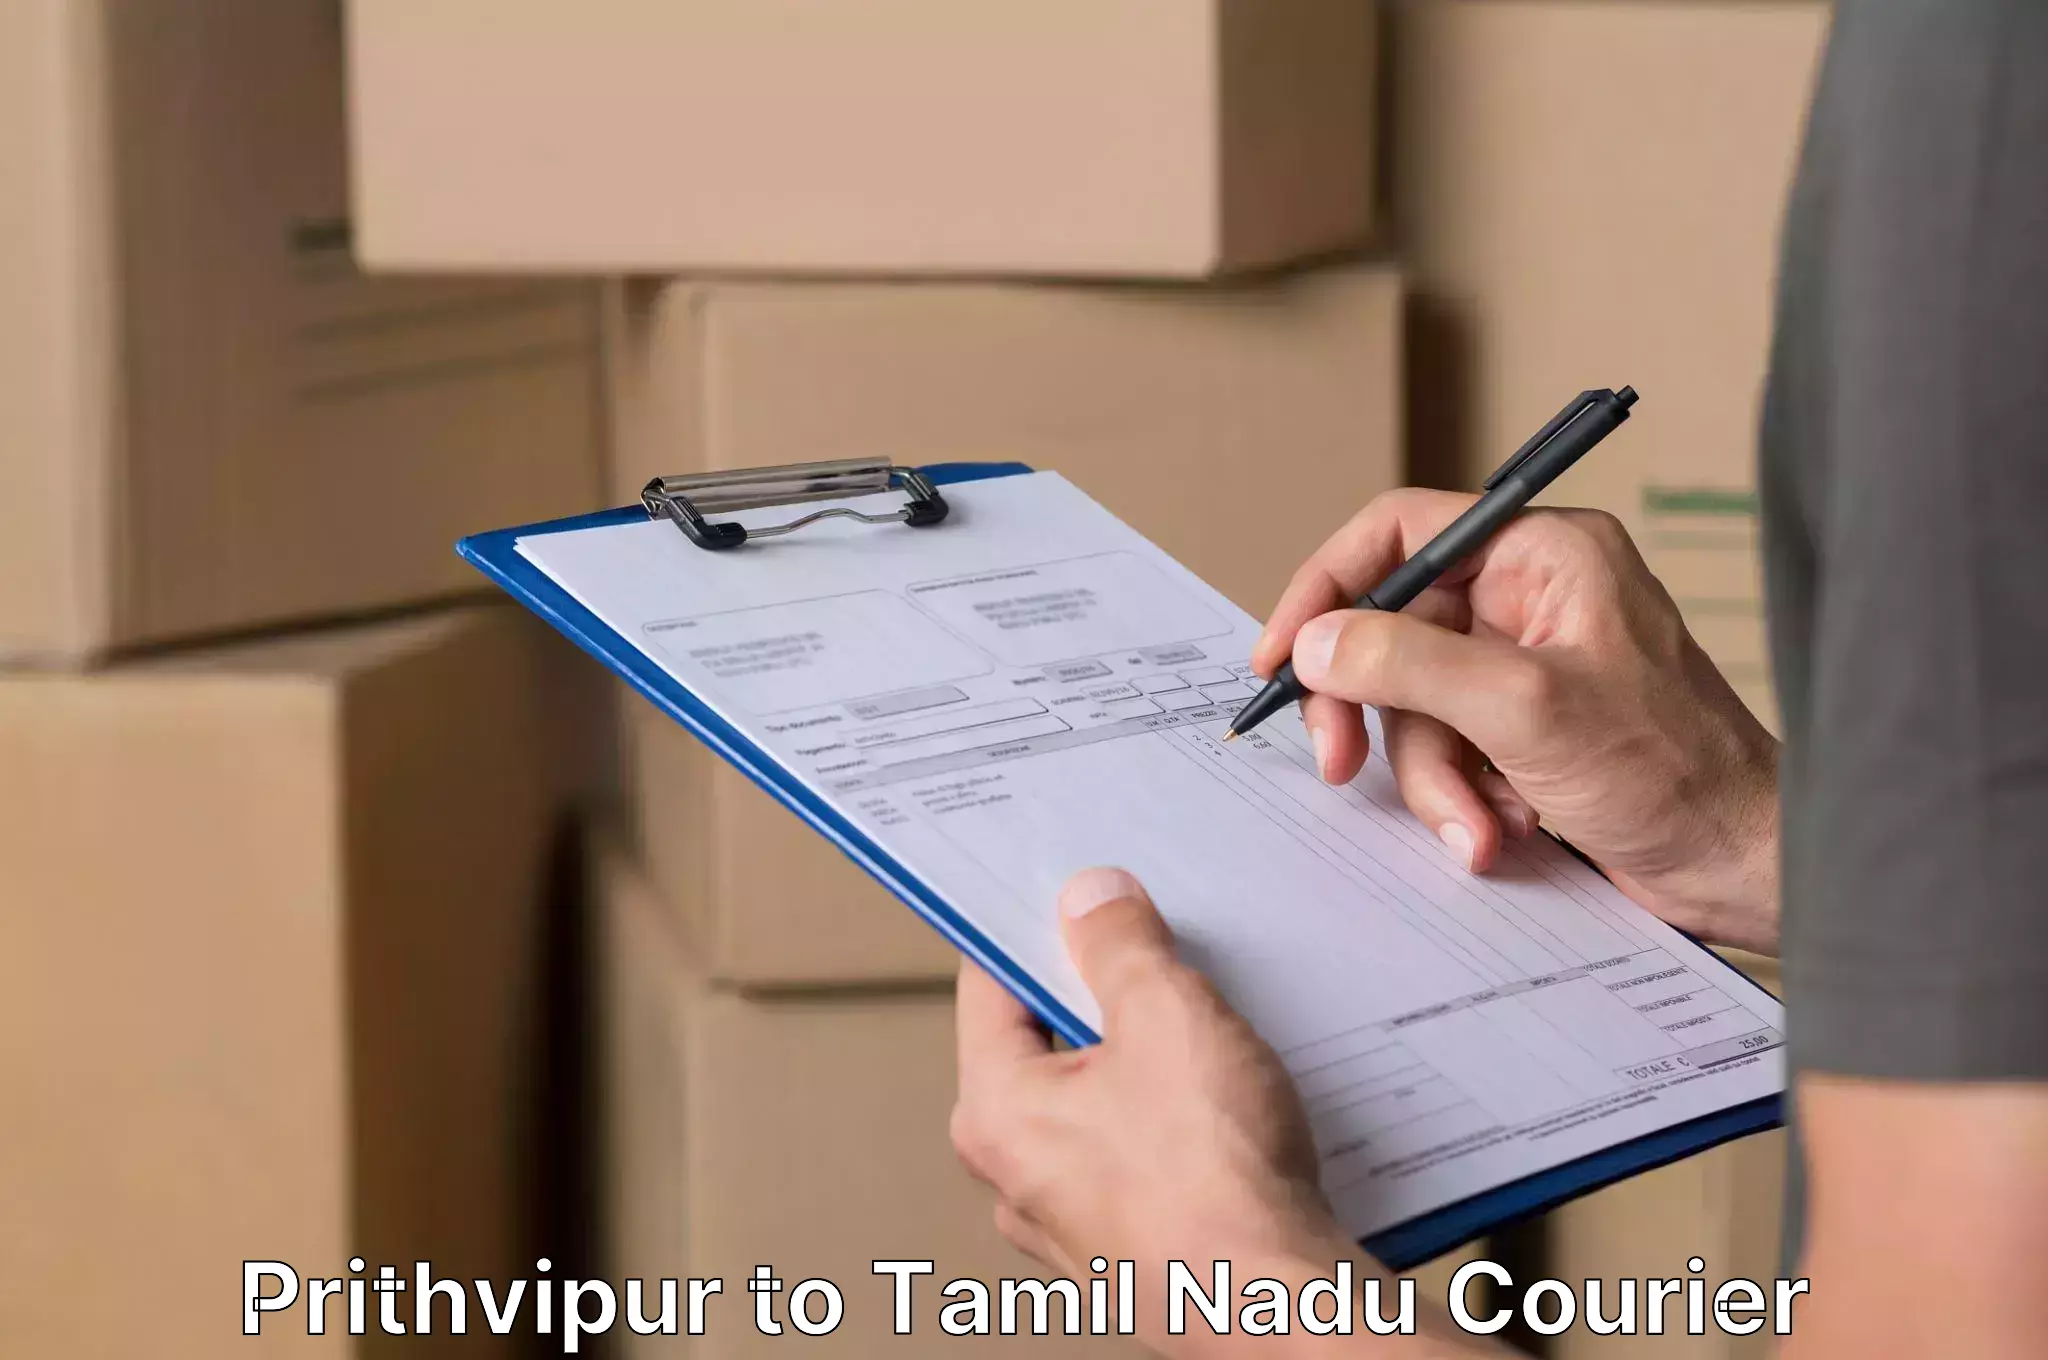 Efficient packing and moving Prithvipur to Trichy